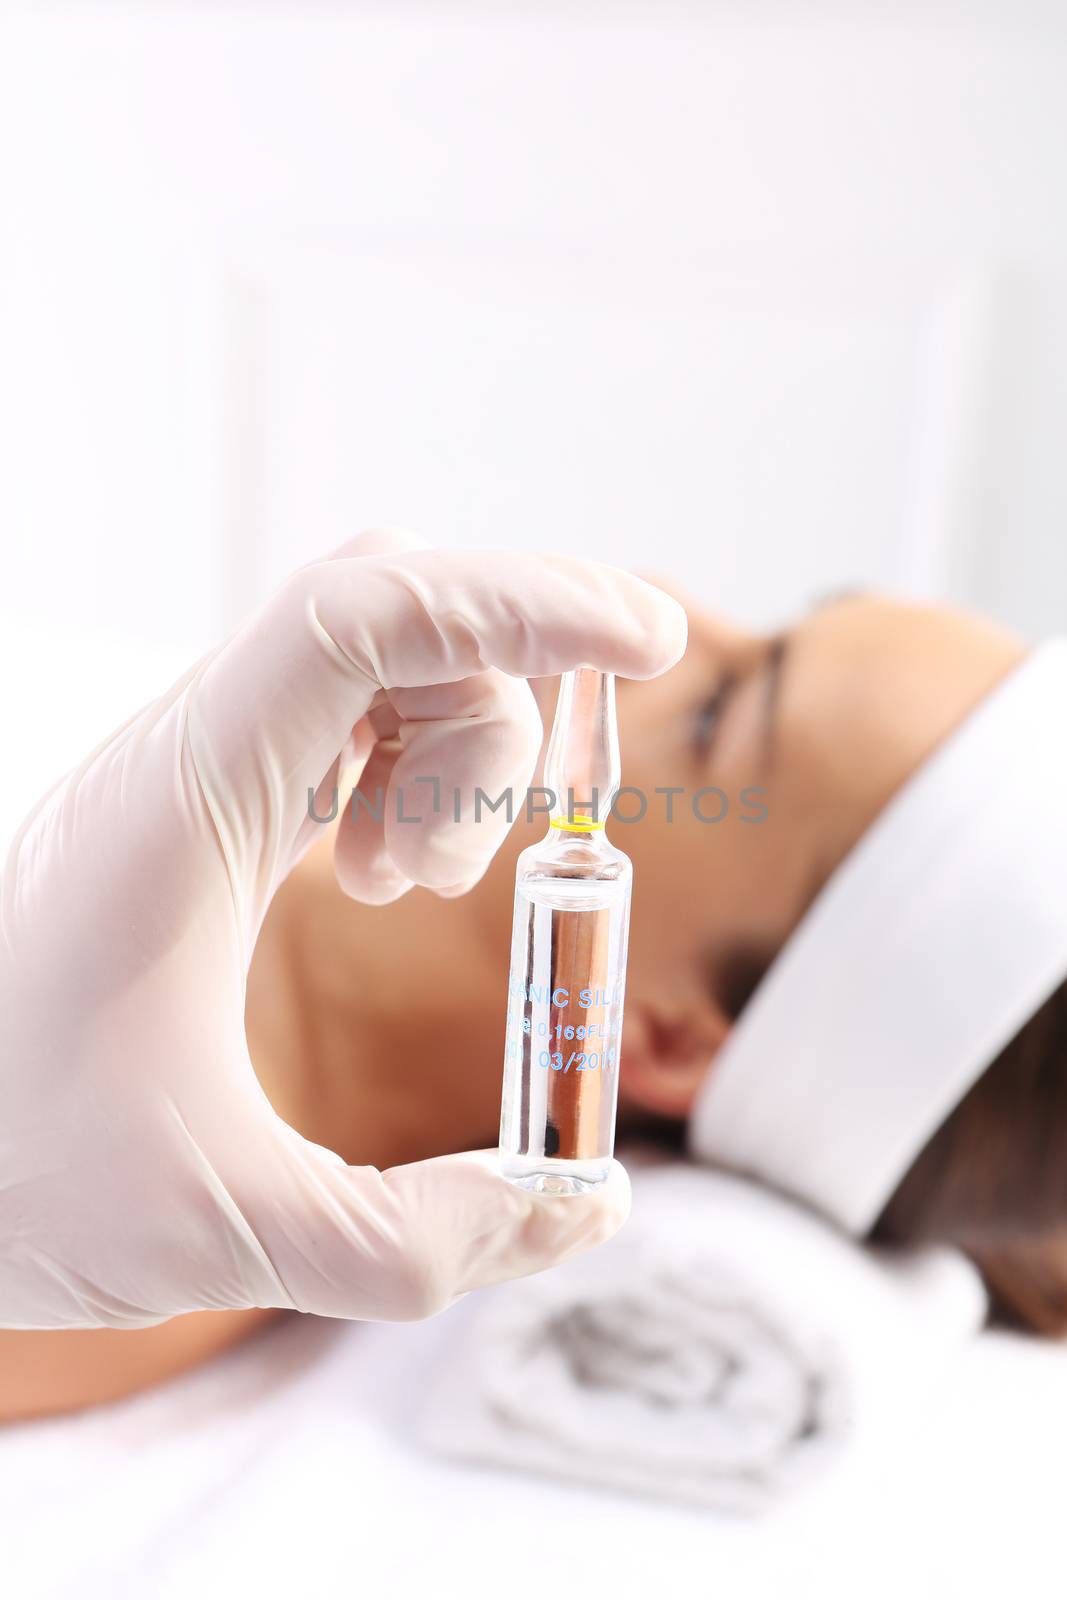 Gloved hand medical shows ampoule with a cosmetic preparation, in the background a woman waiting for surgery by robert_przybysz